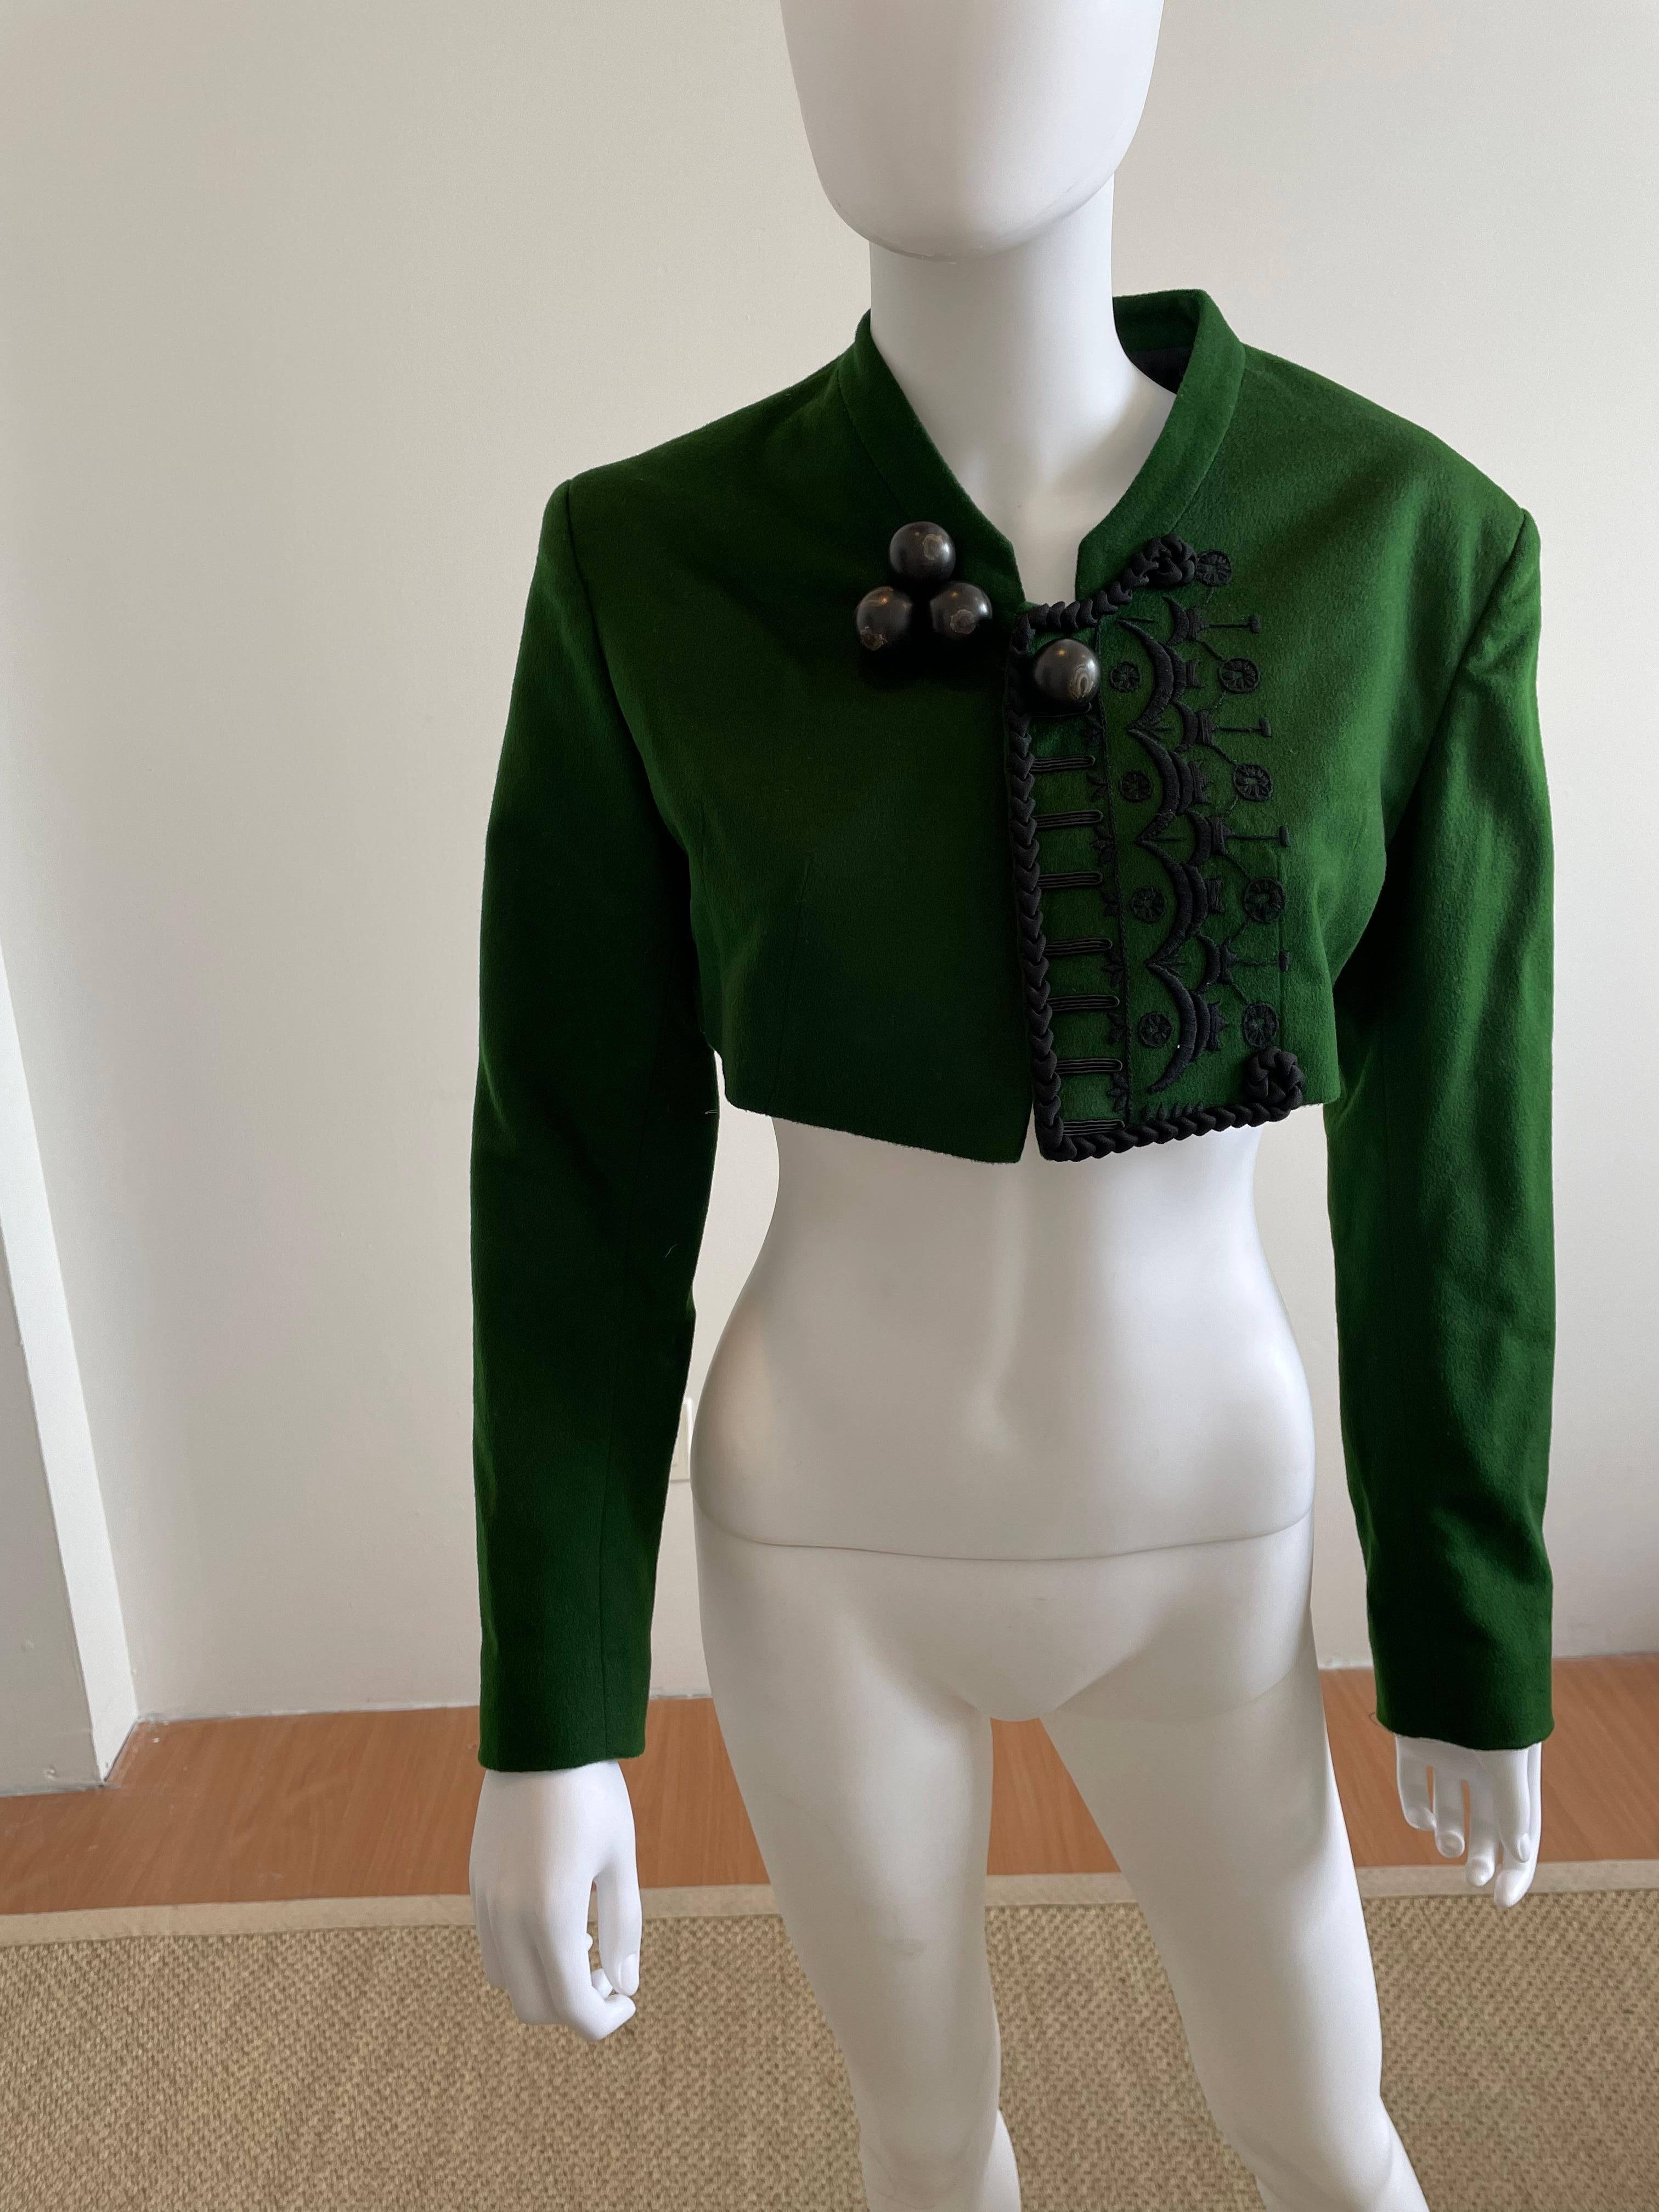 Vintage Helmut Lang Collection Calla green cropped jacket. Made in Italy. Front button closure with an exquisite embroidered detail in black. Pleated back. Size 40. Please inquire if you have any questions! Please be mindful that this piece has led